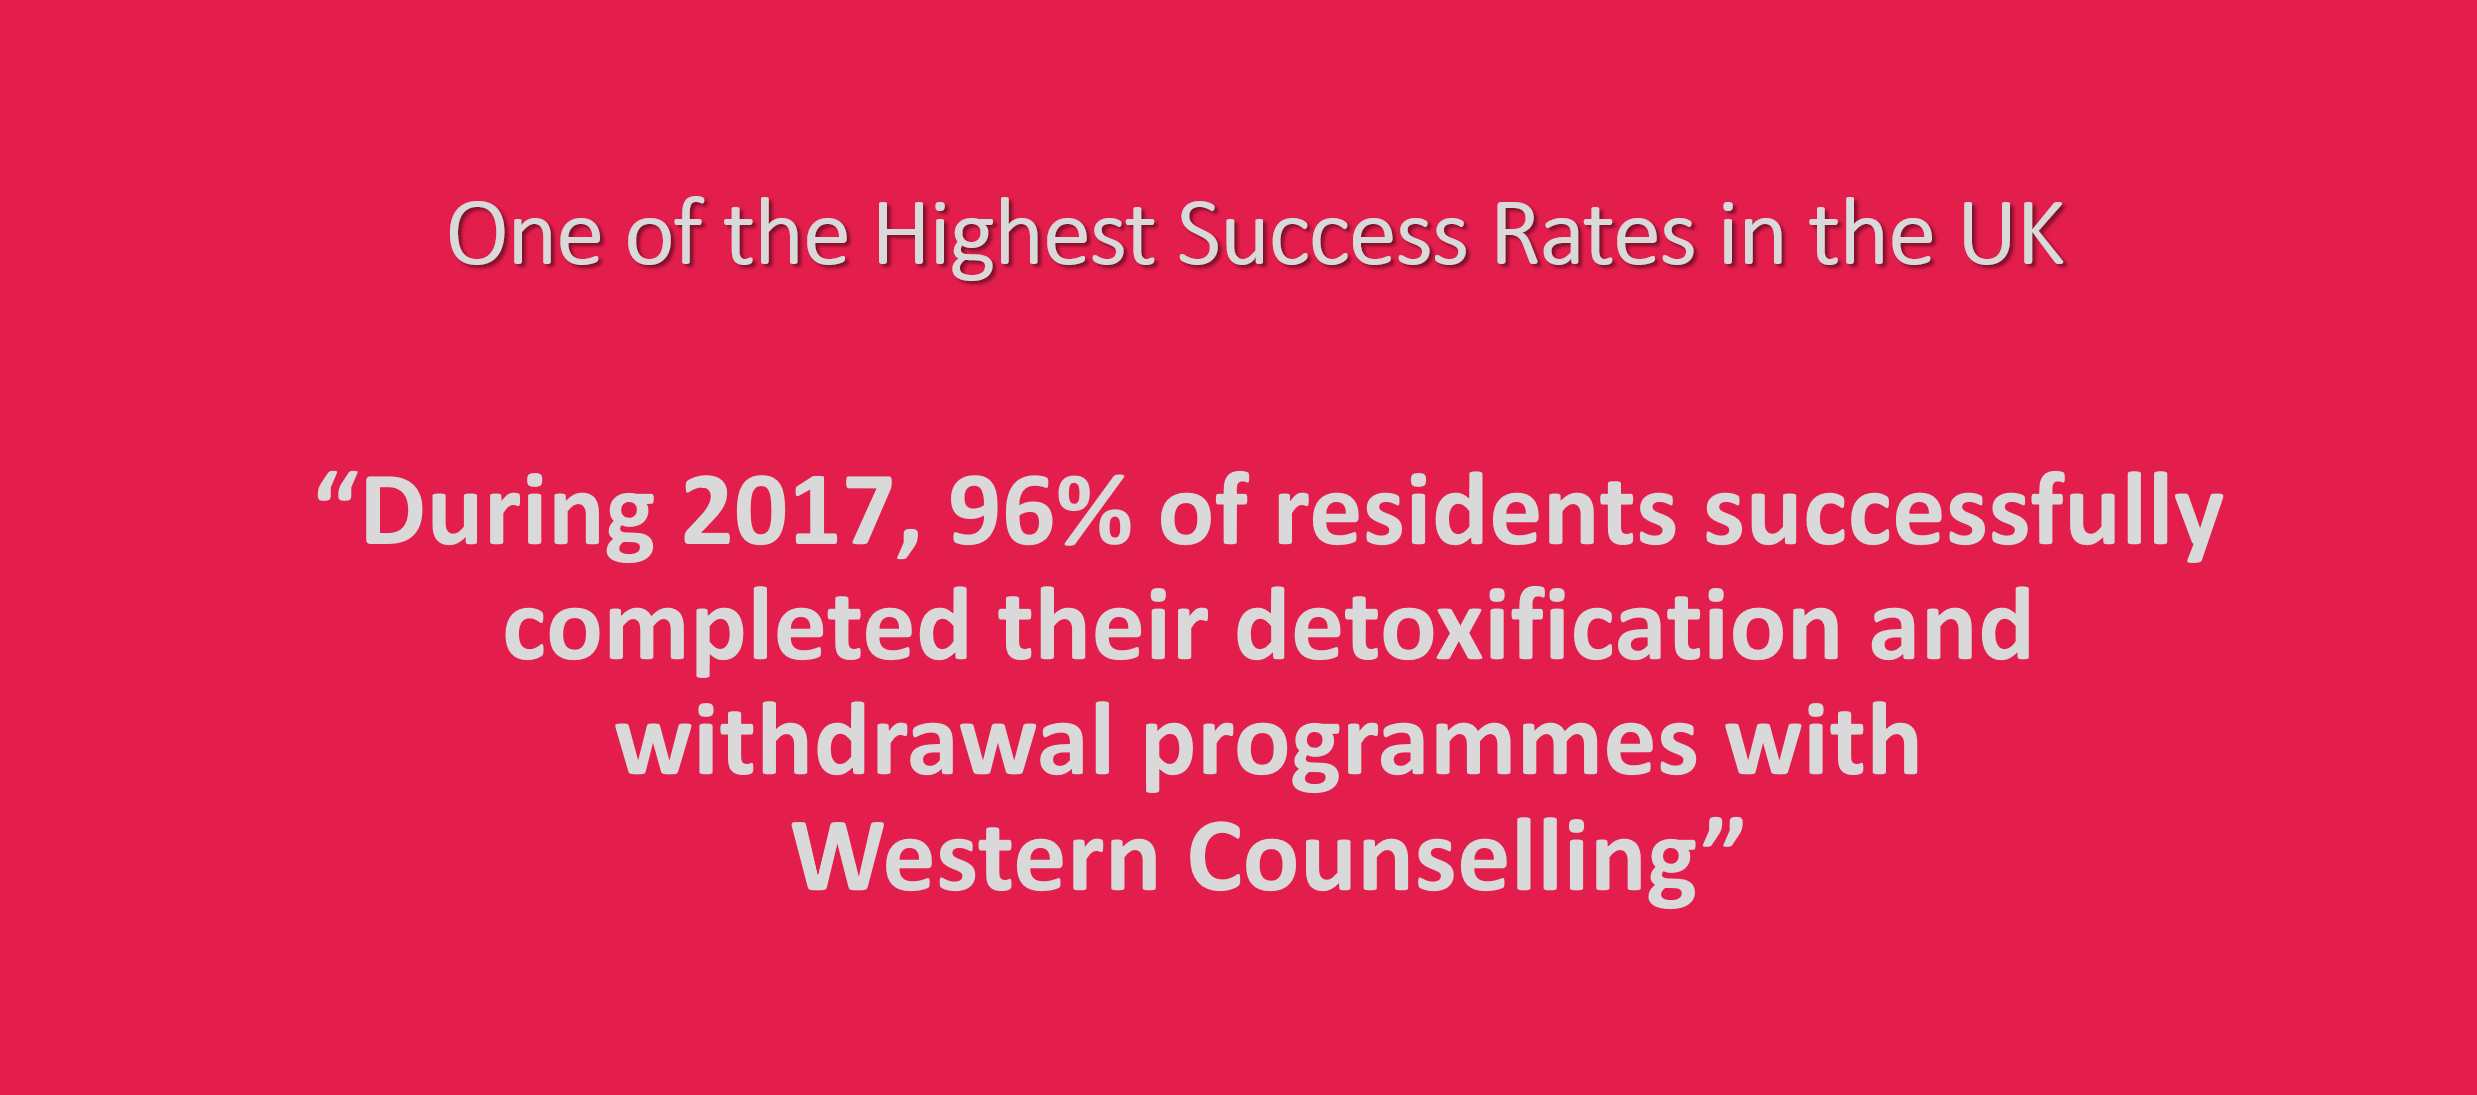 text image describing the drug and alcohol detox admission success rate of Western Counselling in 2017